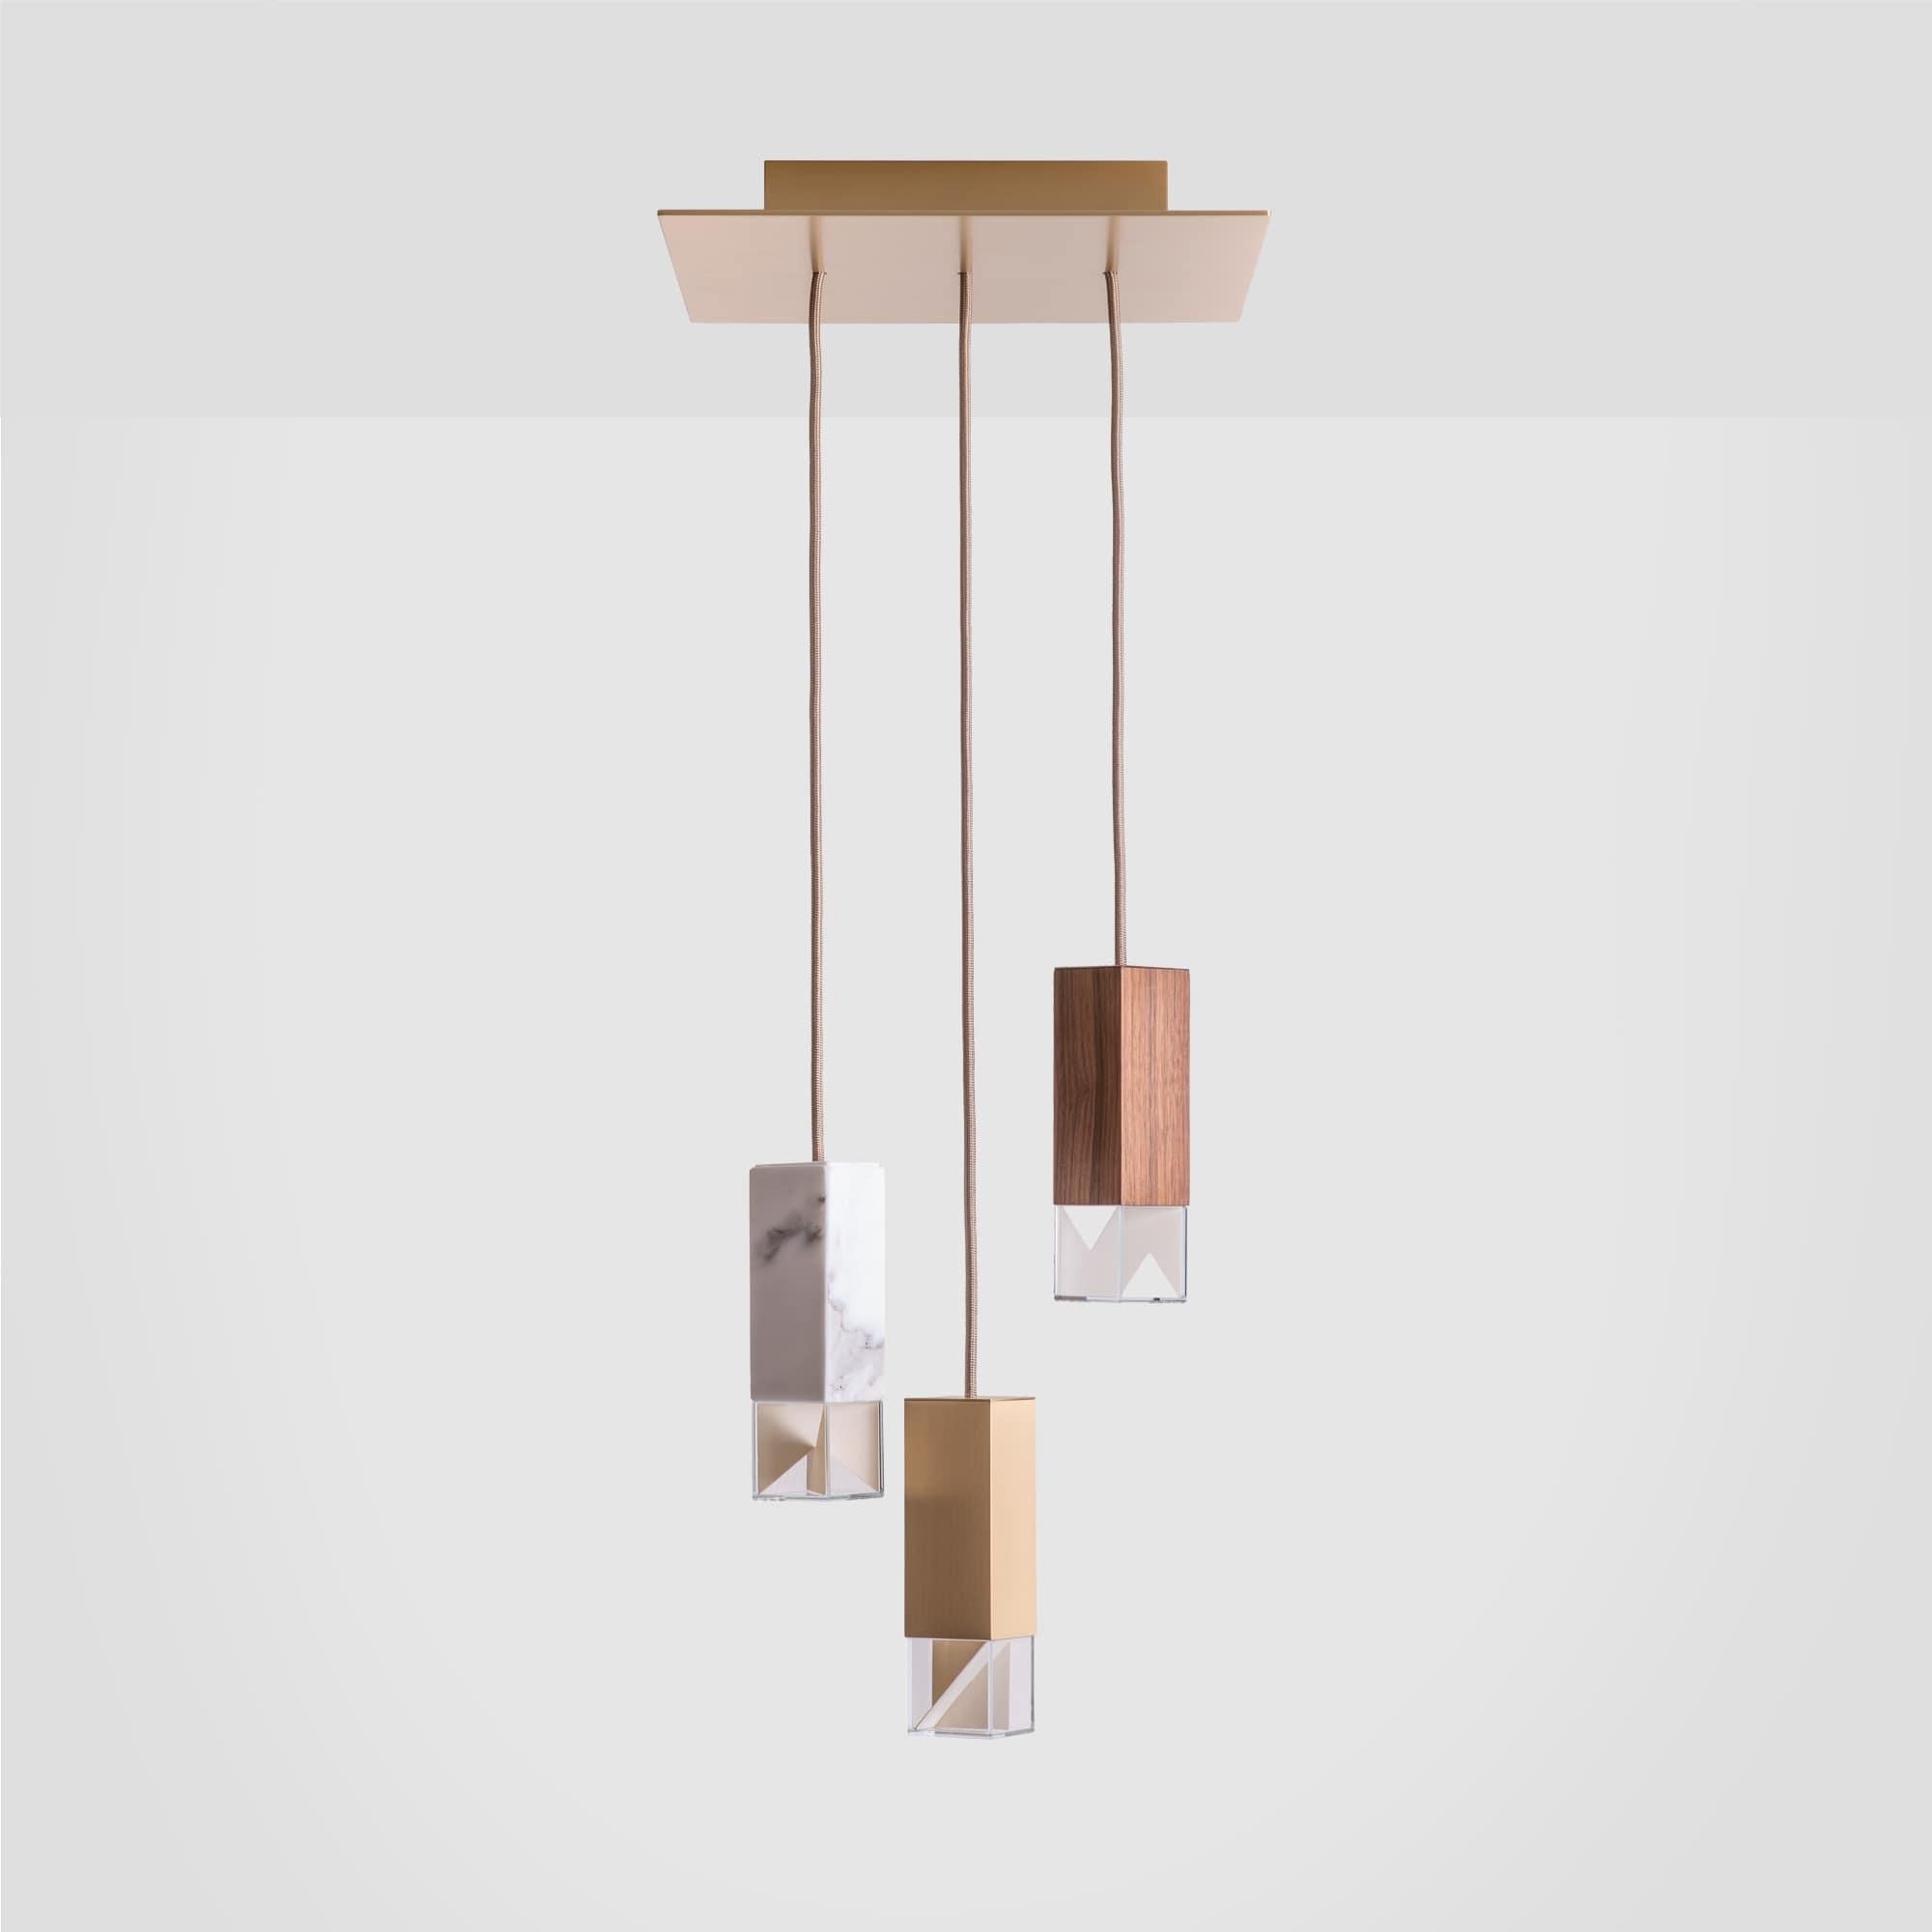 Lamp One collection chandelier by Formaminima
Dimensions: 30 x 30 x H 68 cm
Materials: Lamp bodies available in Calacatta marble, satin solid brass, walnut solid
wood.
Ultra-thin anti-reflection crystal diffuser.
Inside-diffuser Limoges